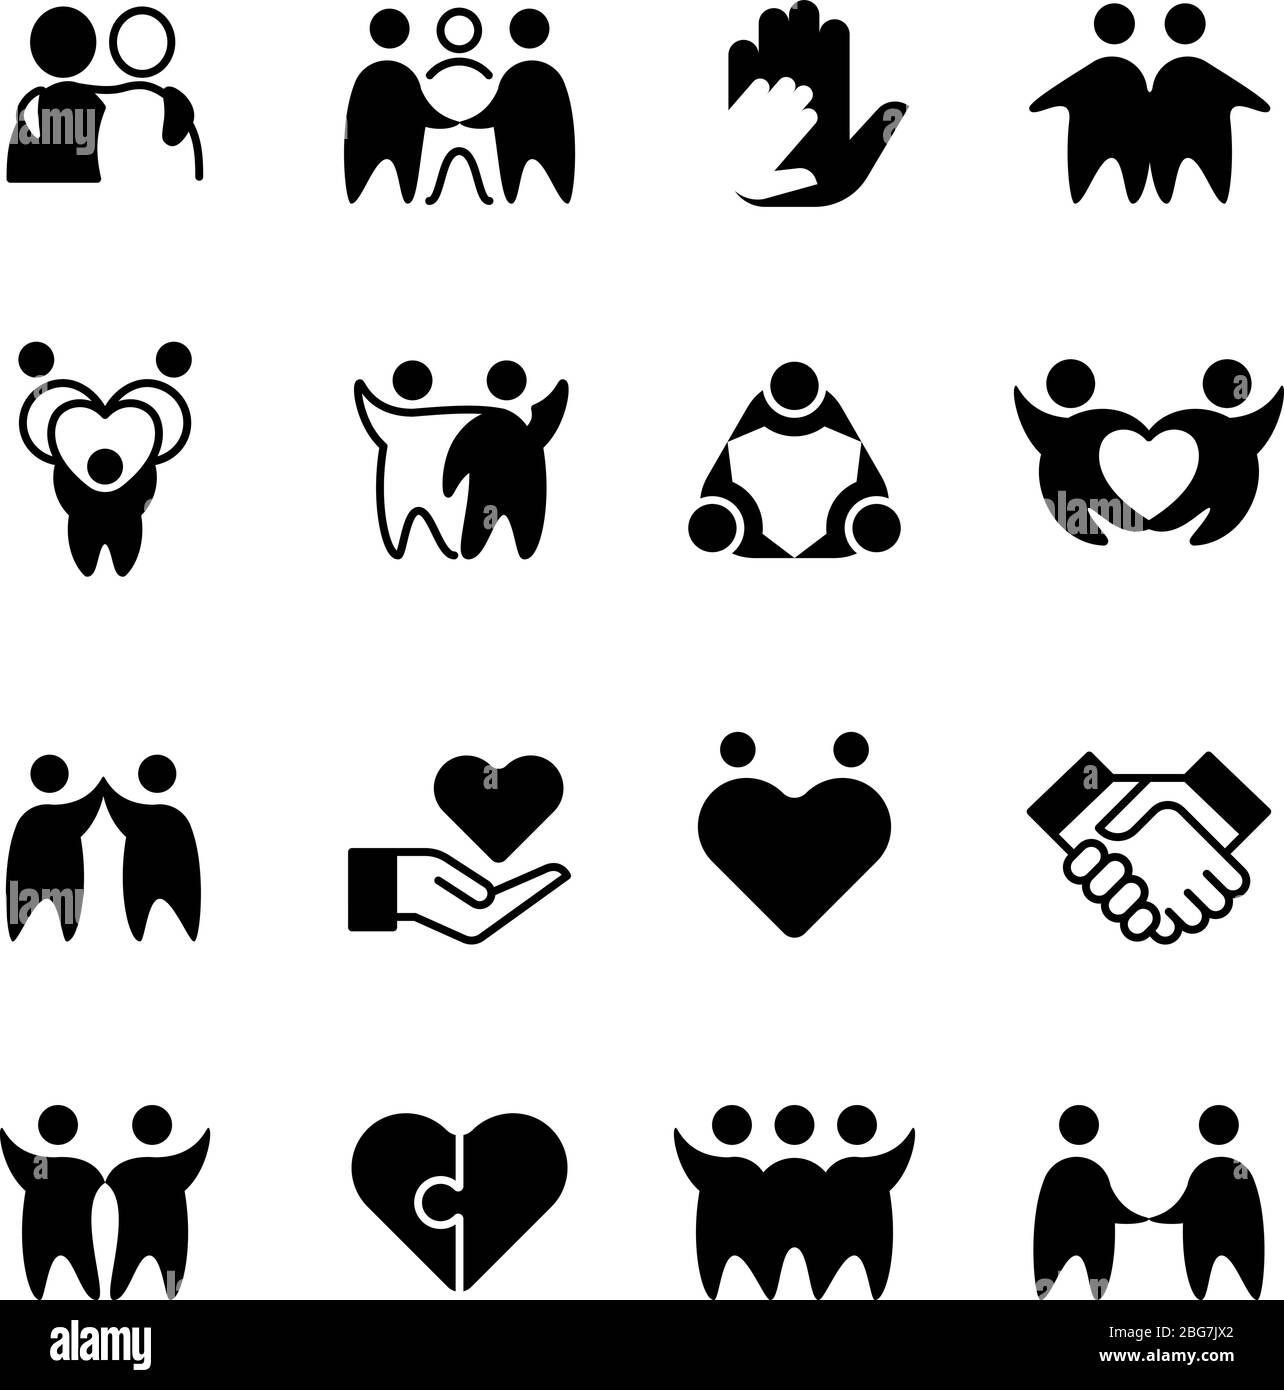 Friends, buddies, man hug line icons. Friendship, harmony and friendly group outline symbols isolated. Vector people male friends together monochrome Stock Vector